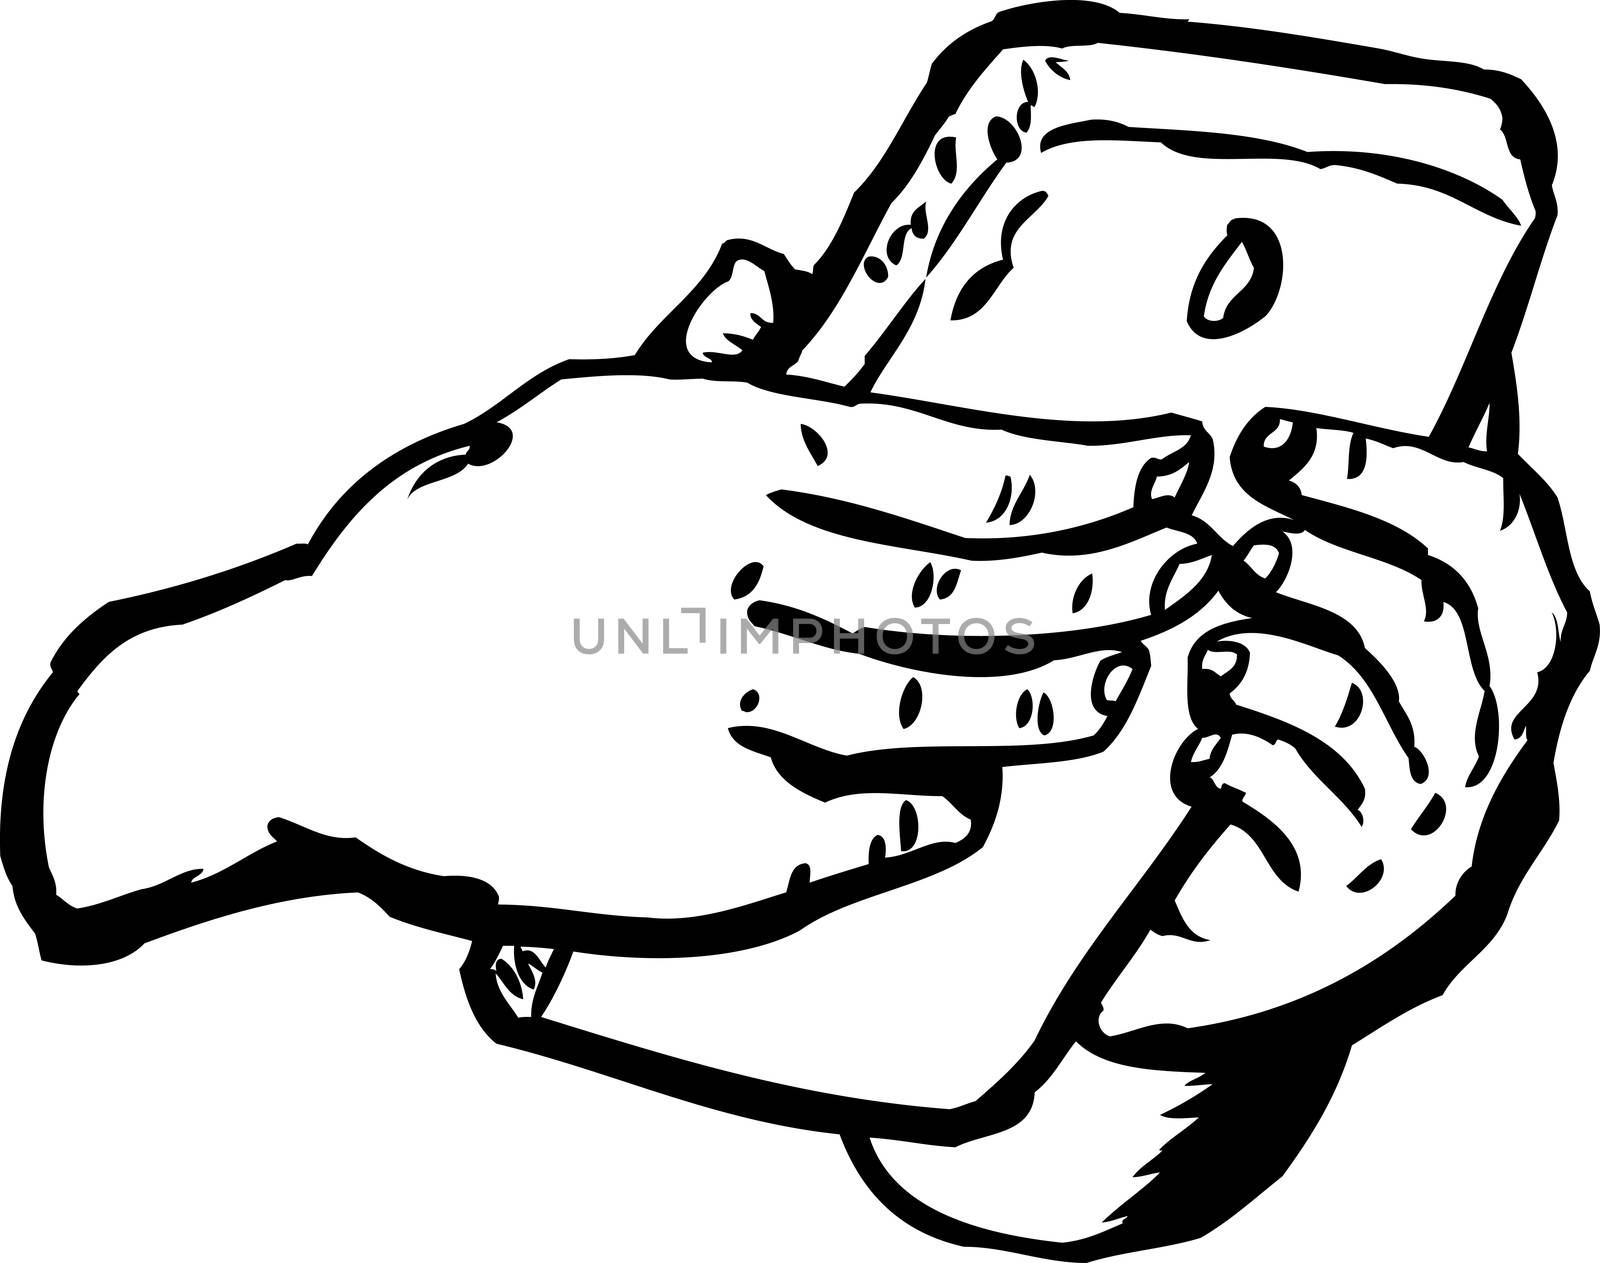 Outlined hands typing something on cell phone over white background